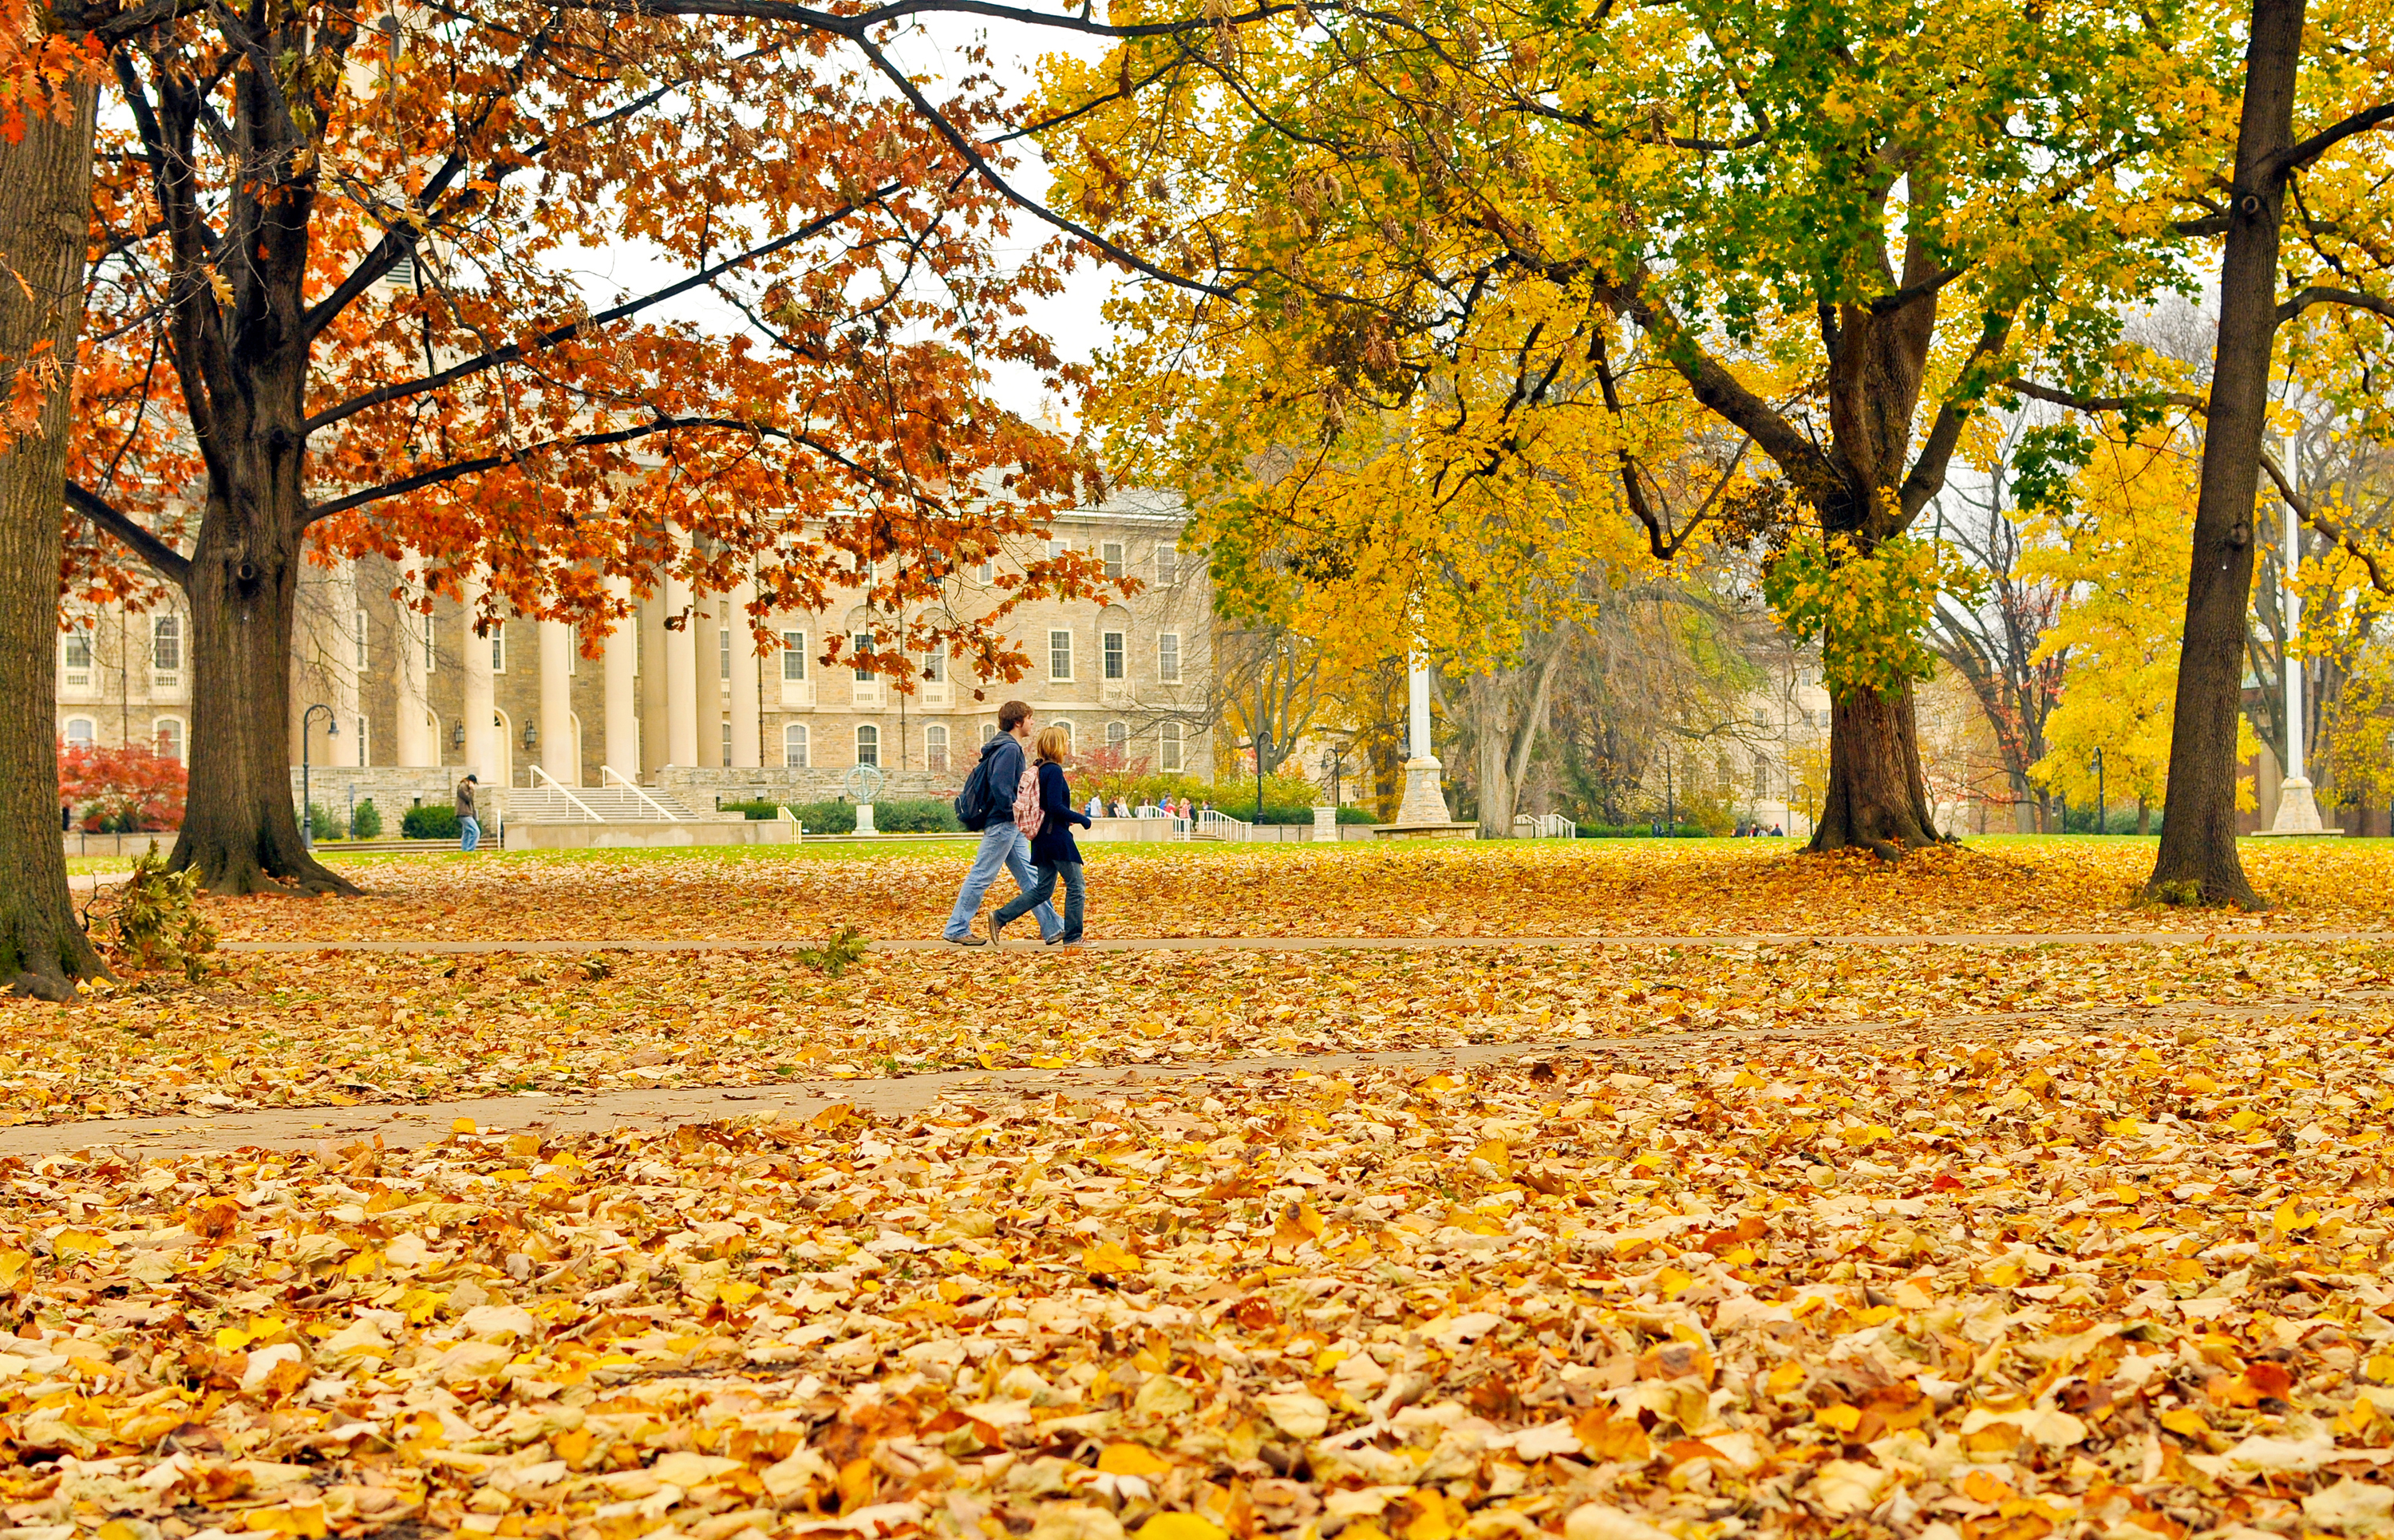 Students walk through campus at Penn State University in State College, Pennsylvania. Photo: PSUpix via FLickr